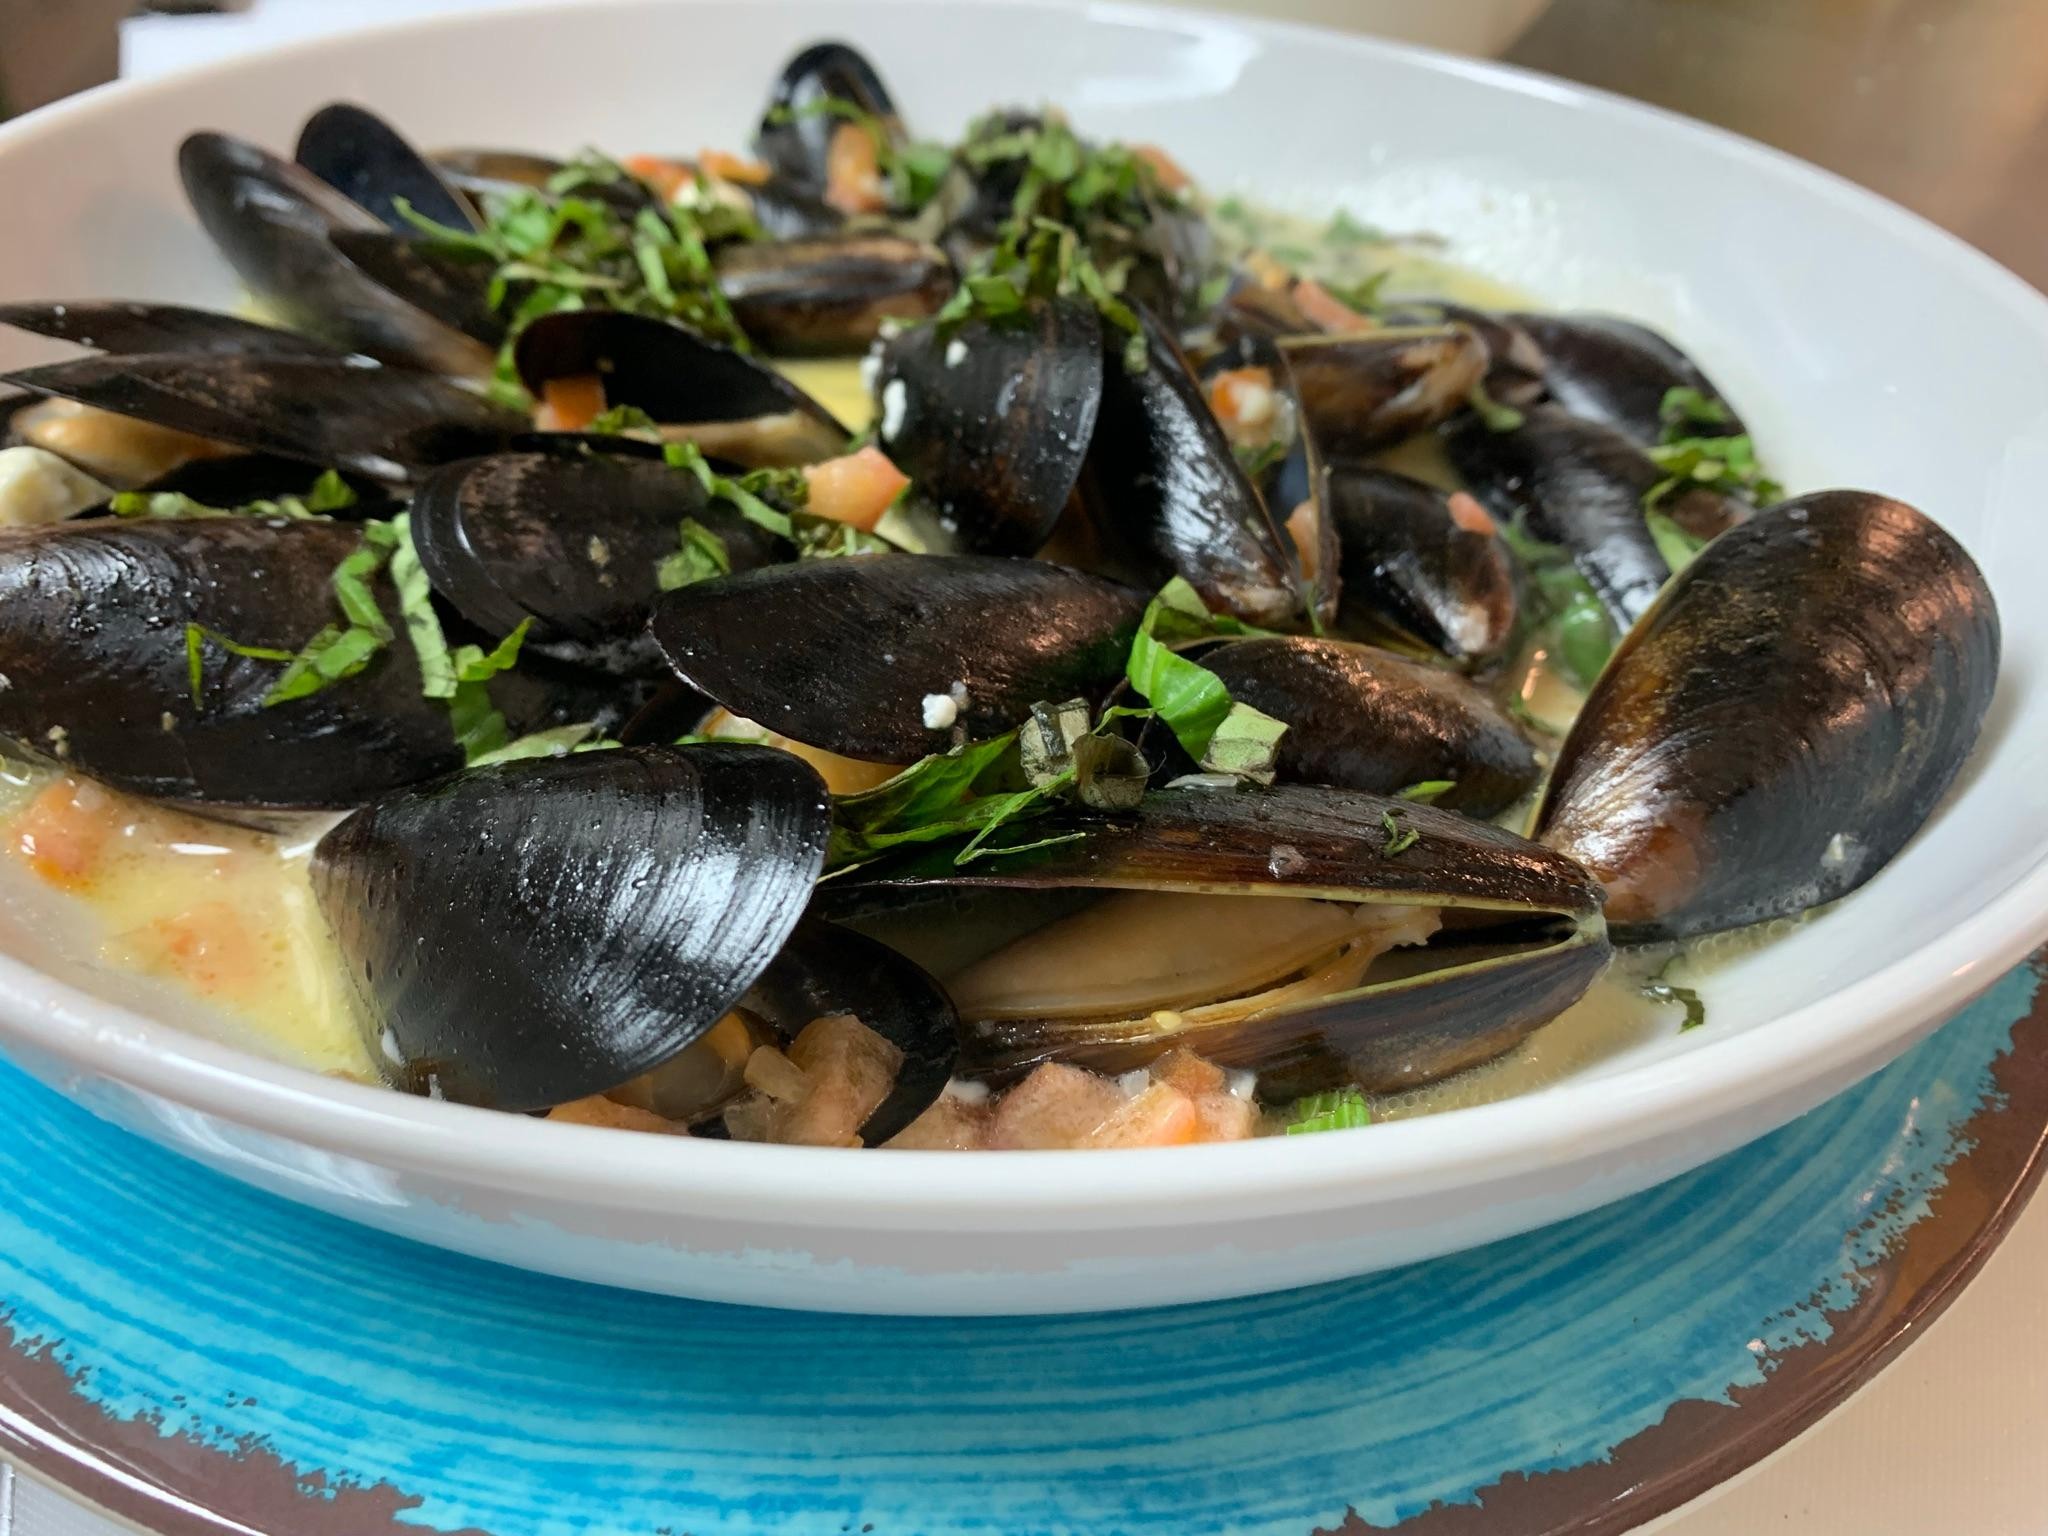 Calusa Mussels